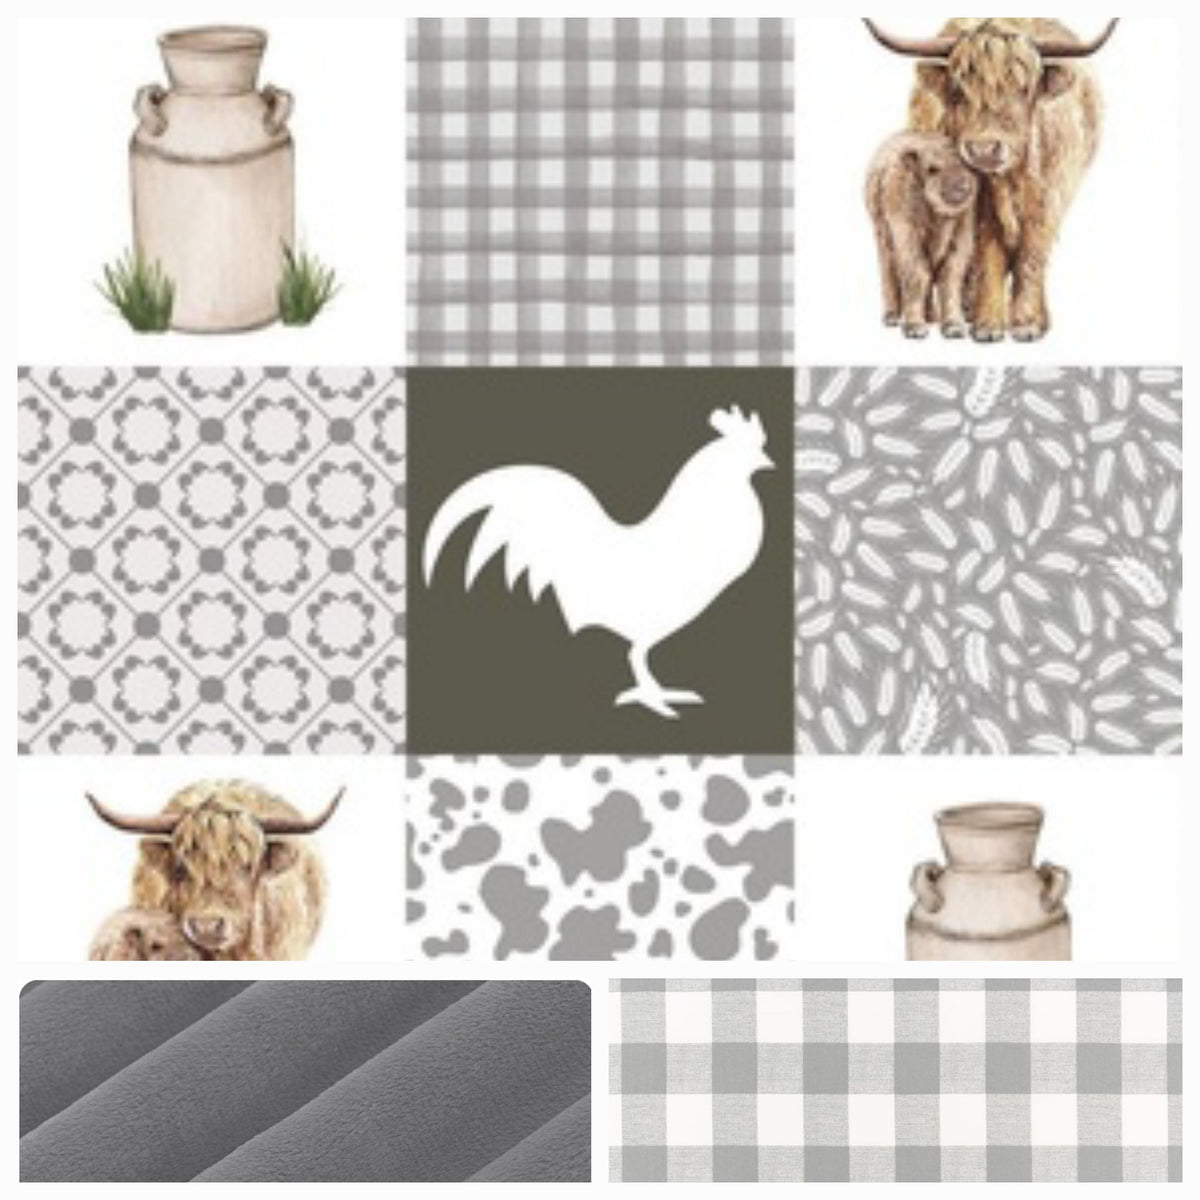 New Release Neutral Crib Bedding - Highland Cow Farm Baby Bedding &amp; Nursery Collection - DBC Baby Bedding Co 